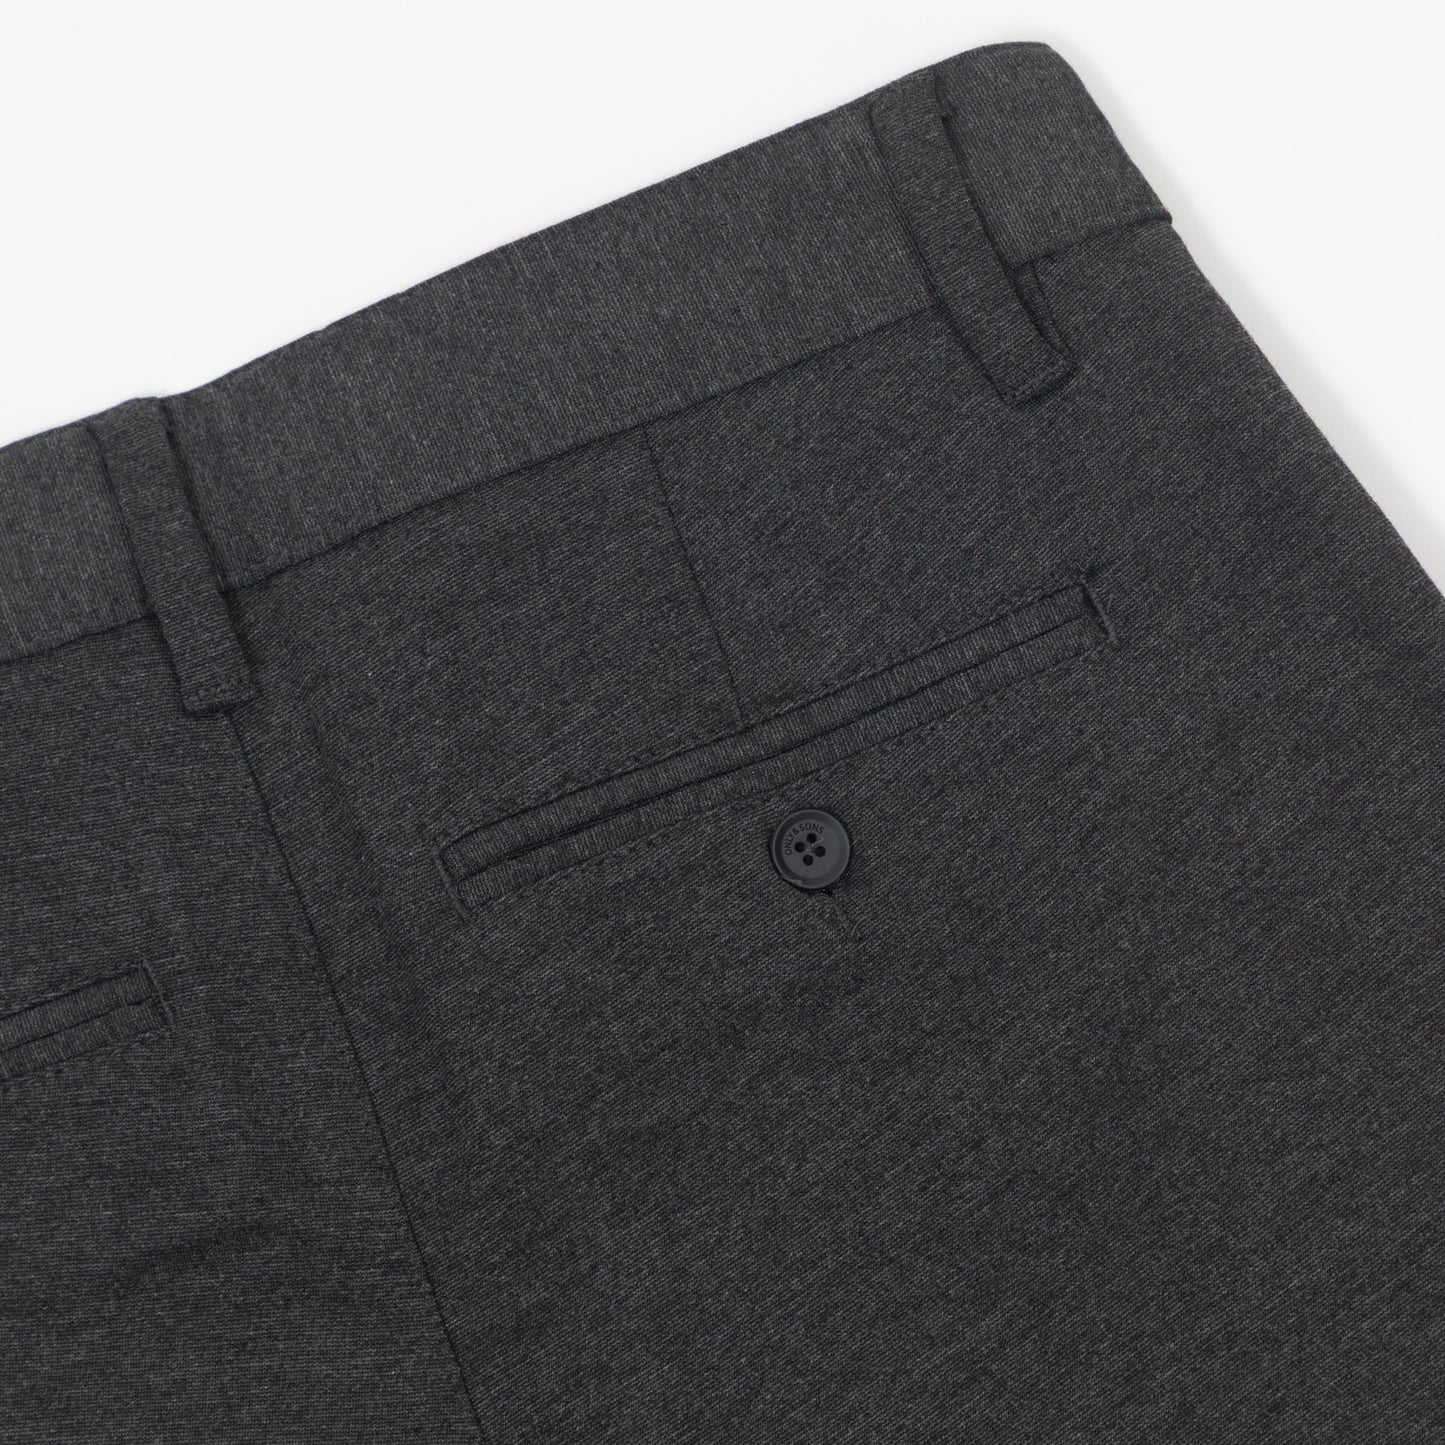 ONLY & SONS Mark Slim Tapered Fit Trousers in DARK GREY